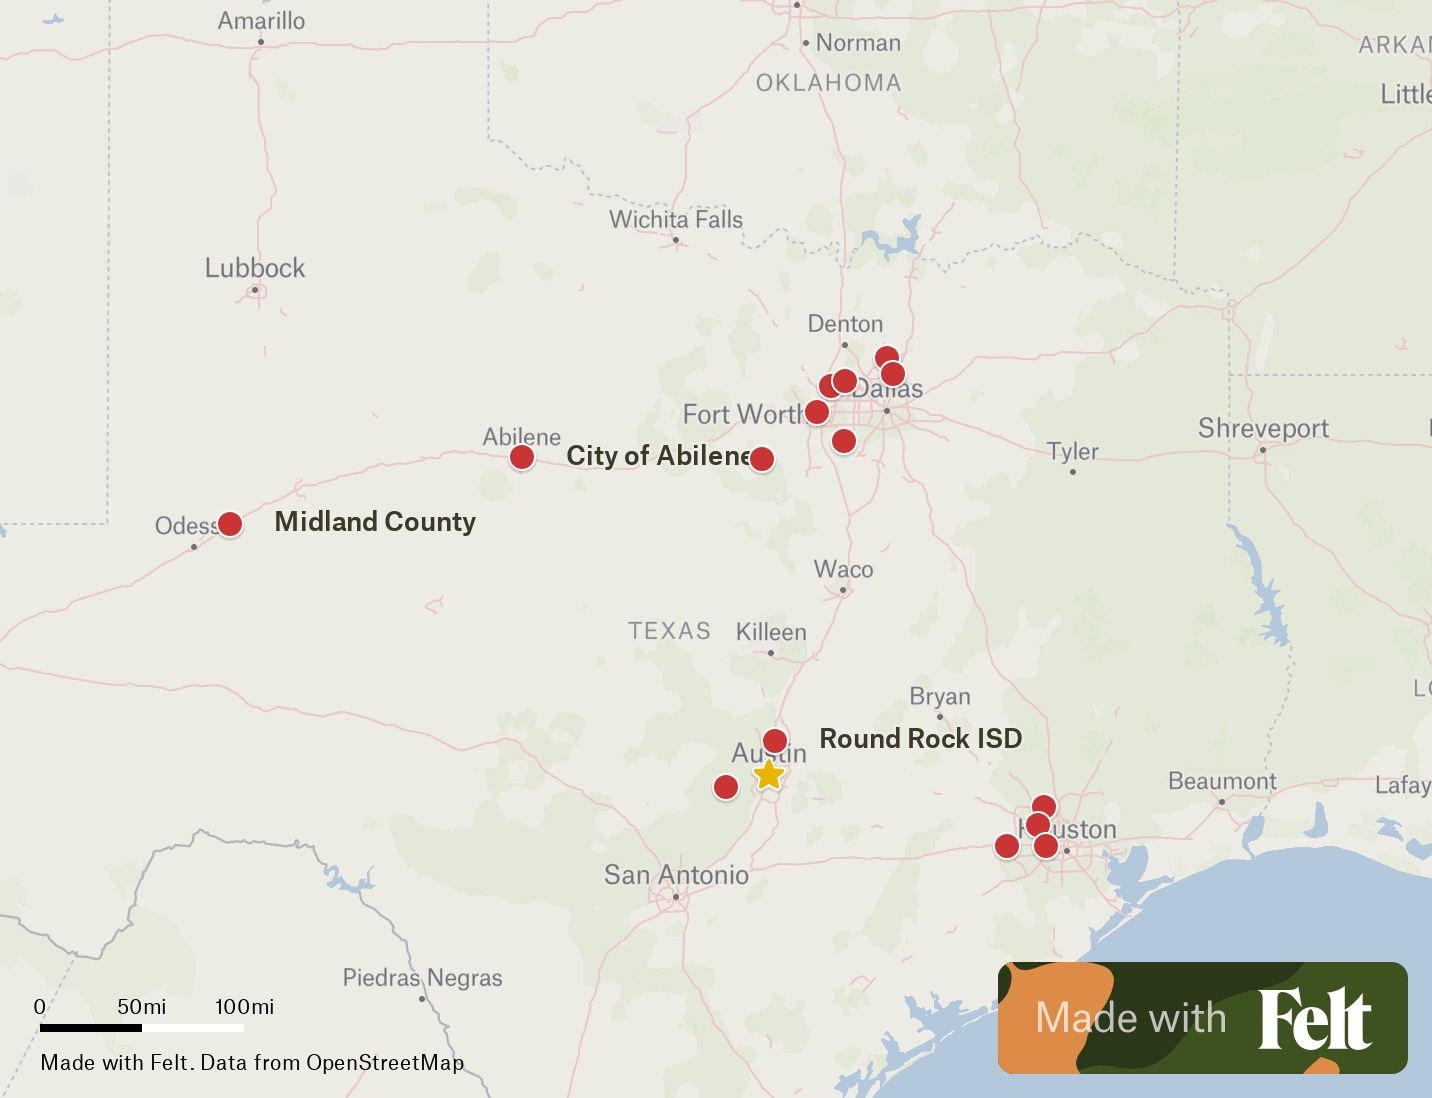 A screenshot of a map of Texas highlighting the school districts and counties that have banned books as part of the chilling effect of HB 900. The map image links back to the interactive map.